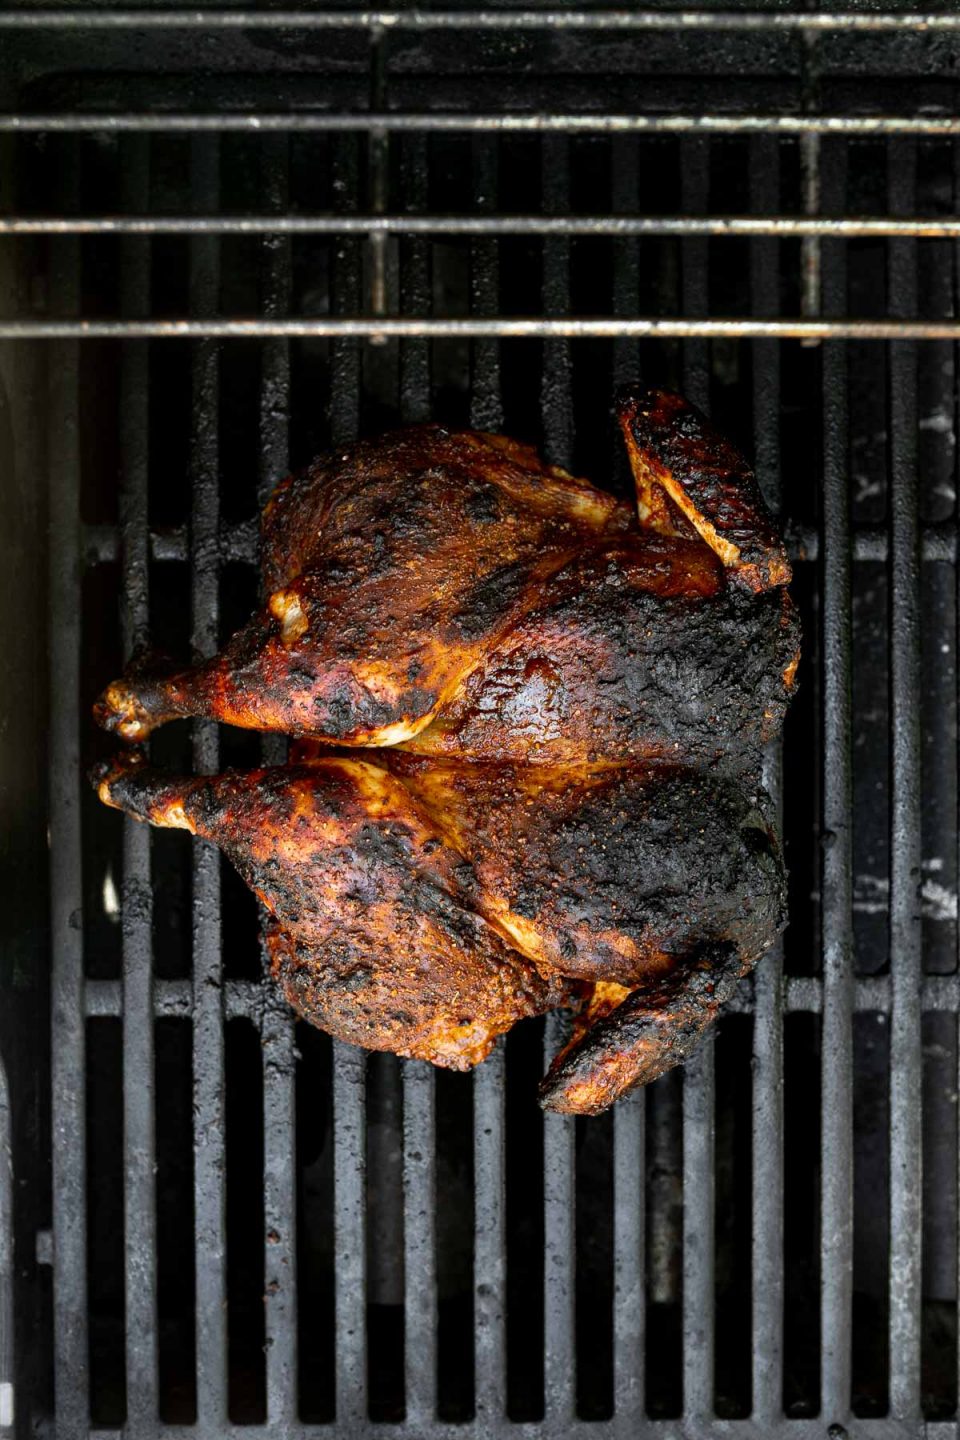 Blackened spatchcocked/butterflied chicken on grill grates.